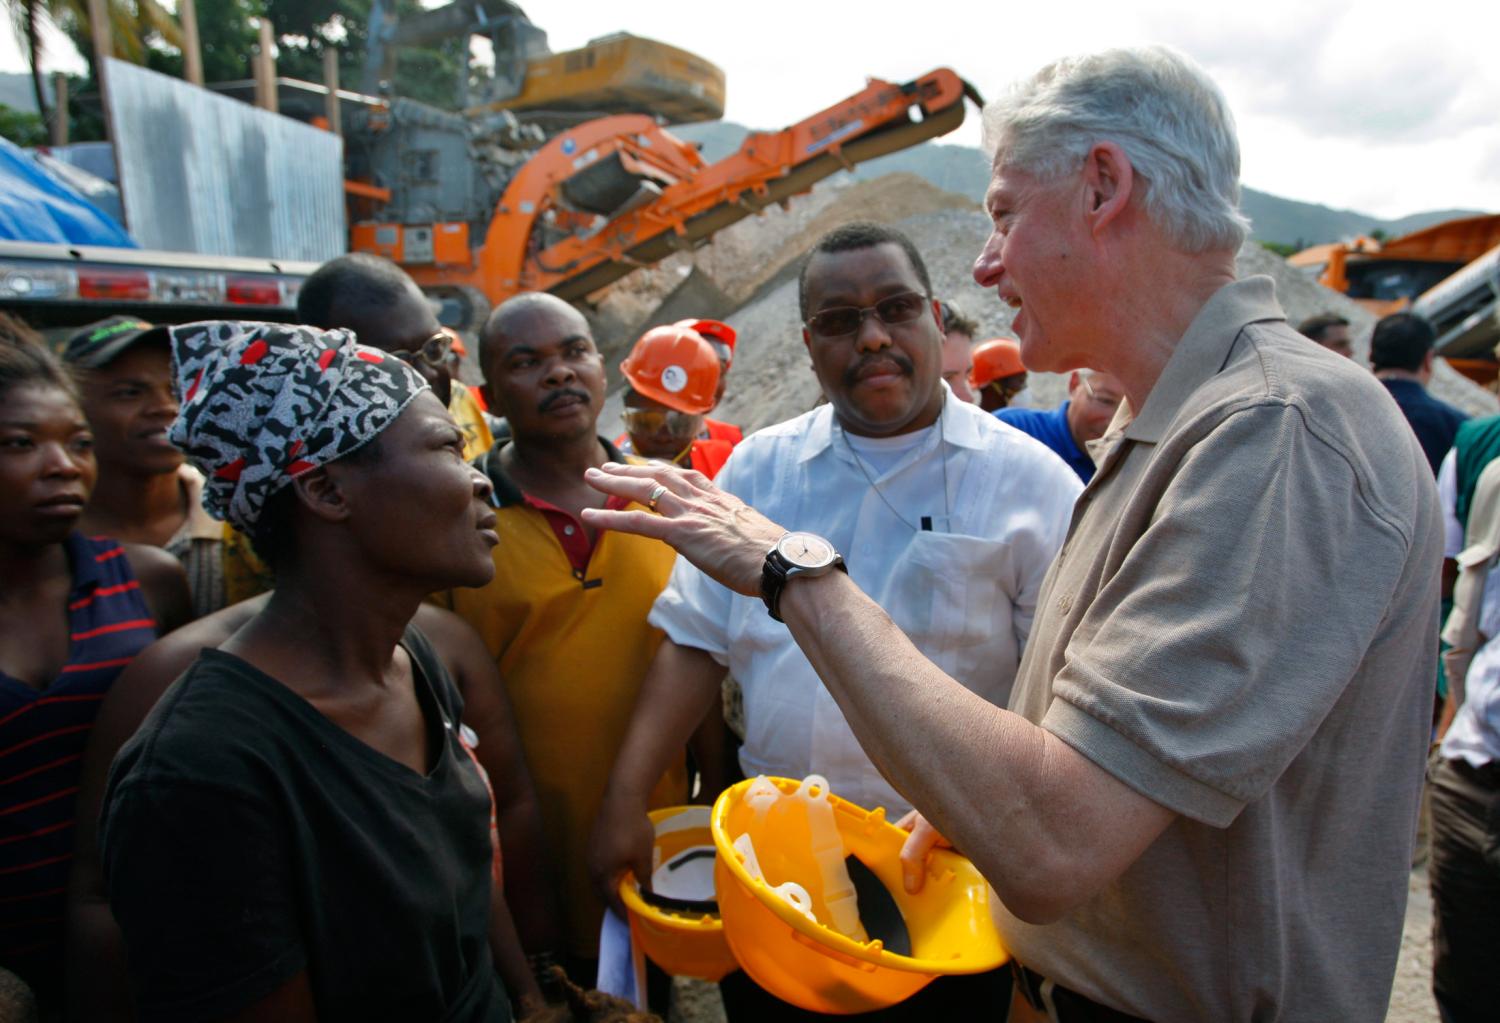 Former U.S. President Bill Clinton speaks with residents as he visits a project of the United Nations Development Program (UNDP) to recycle debris in Port-au-Prince